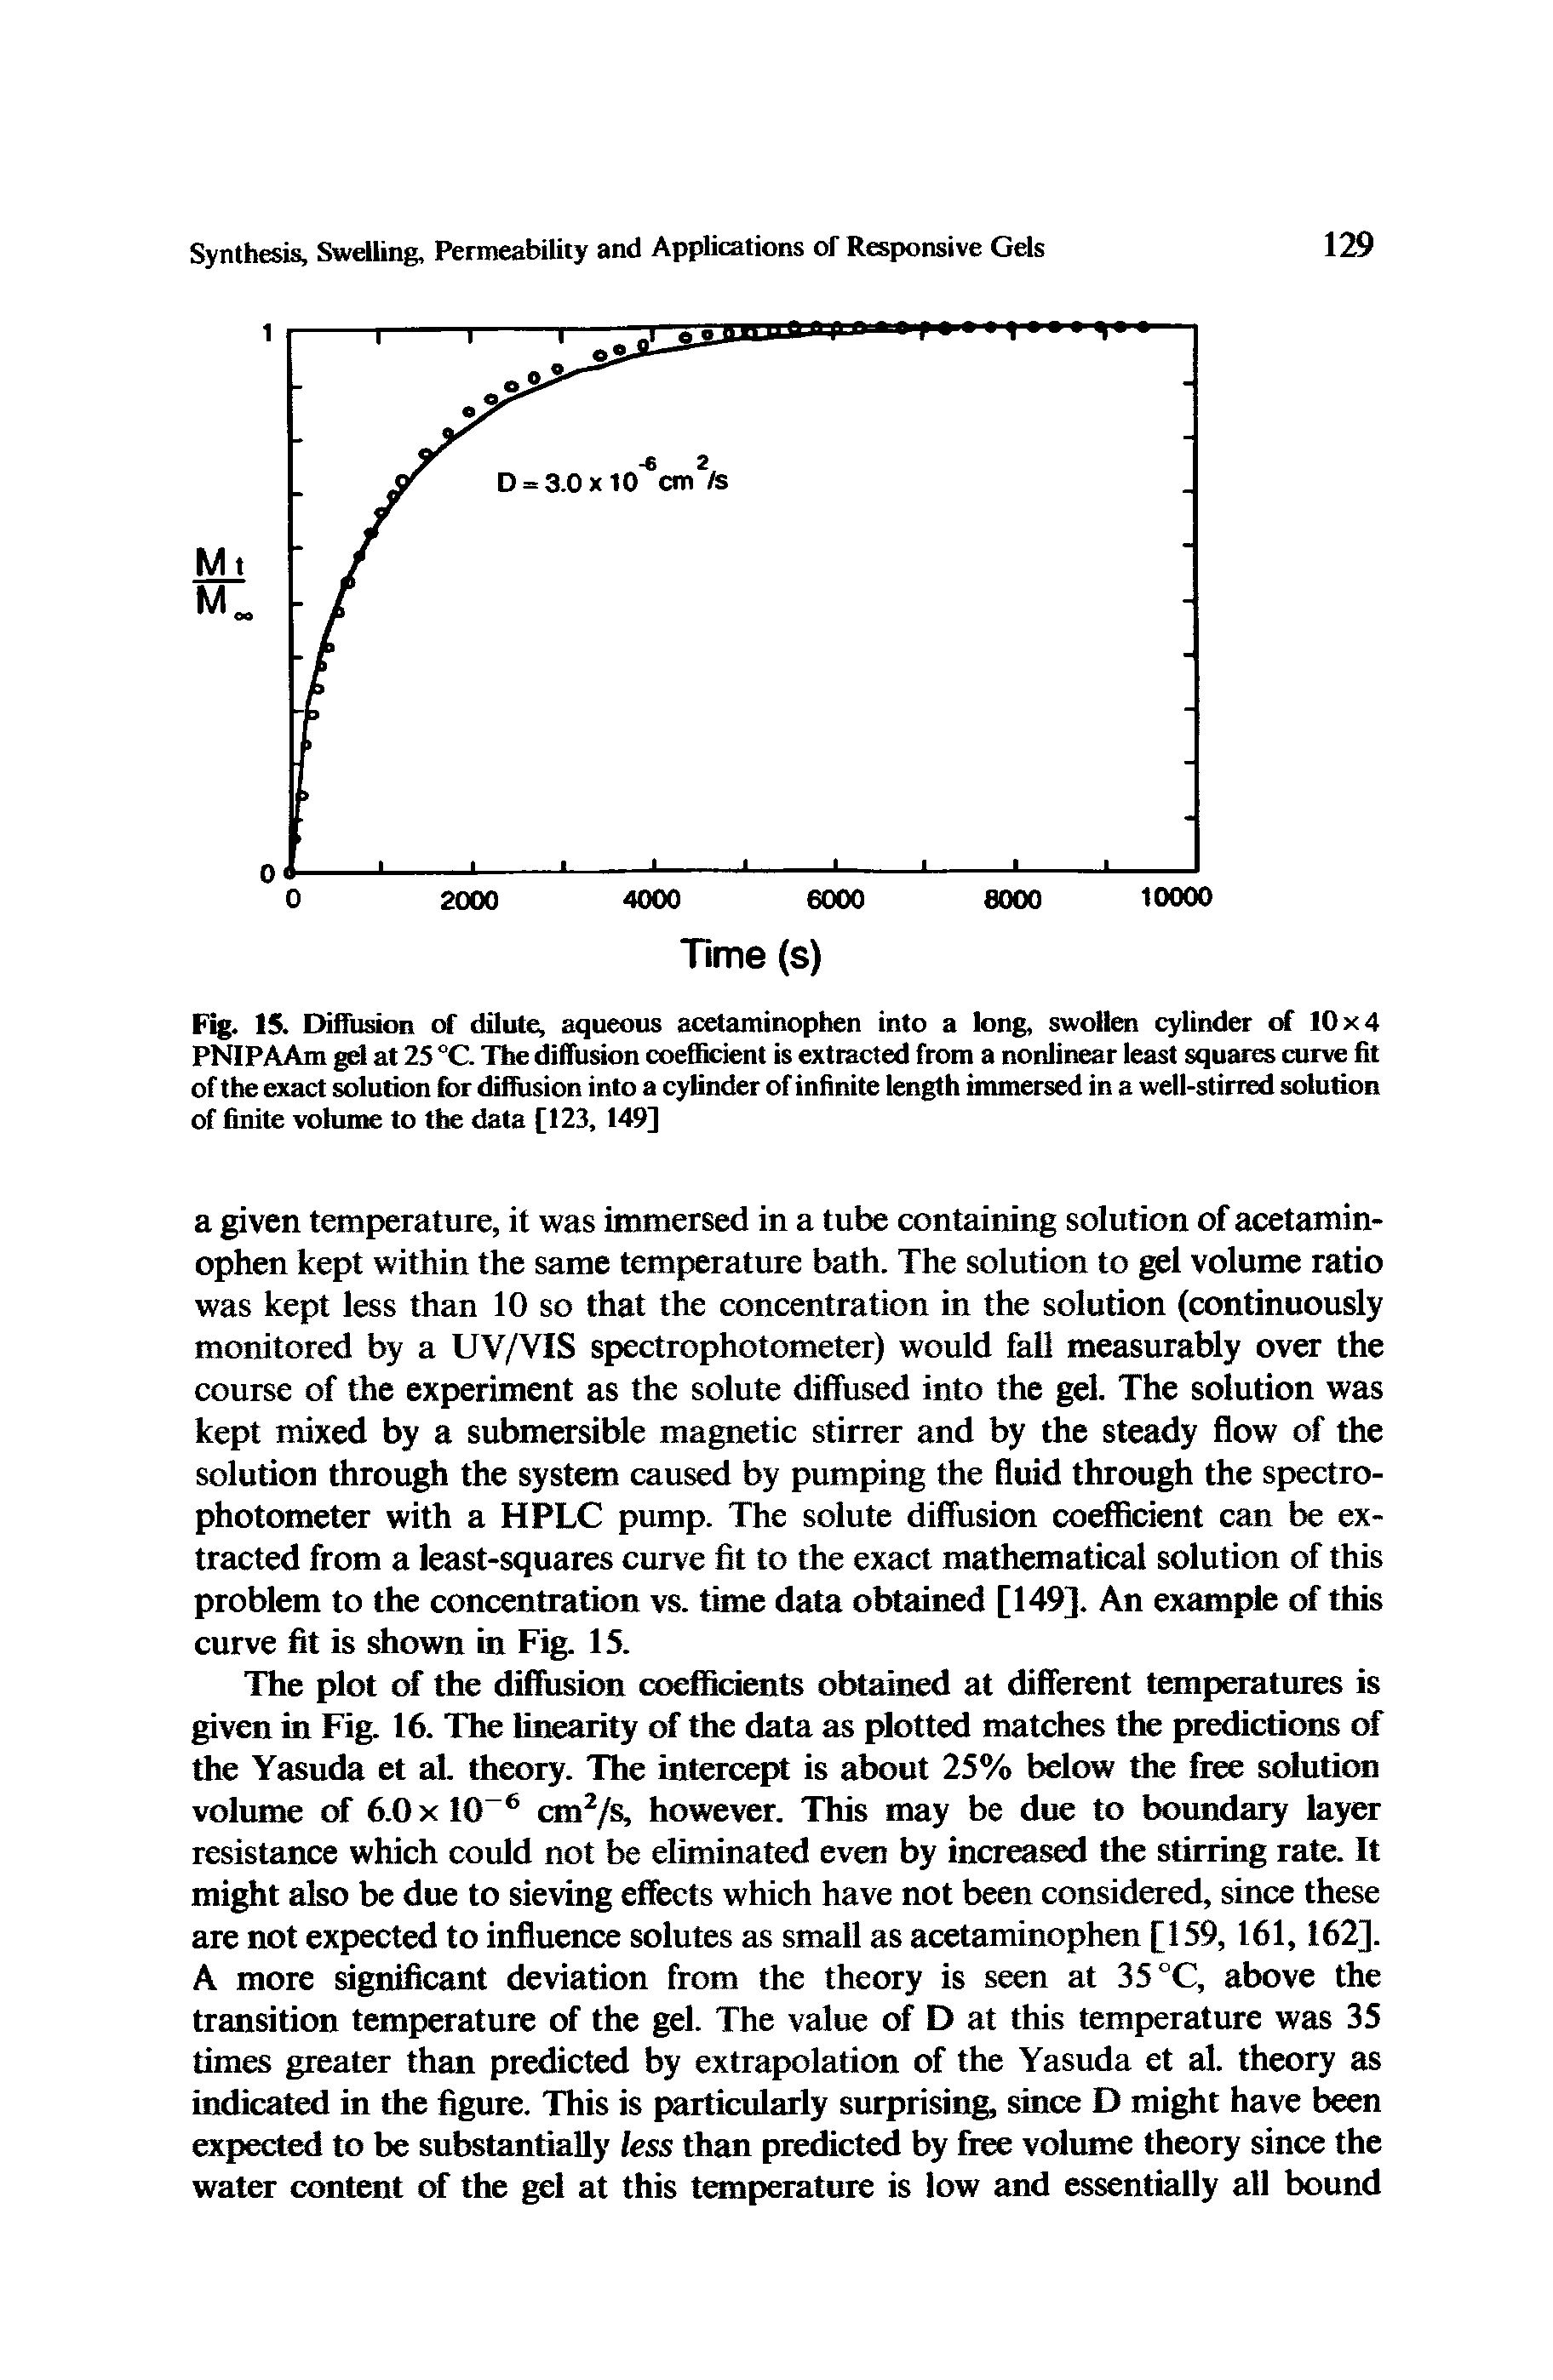 Fig. 15. Diffusion of dilute, aqueous acetaminophen into a long, swollen cylinder of 10x4 PNIPAAm gel at 25 °C. The diffusion coefficient is extracted from a nonlinear least squares curve fit of the exact solution for diffusion into a cylinder of infinite length immersed in a well-stirred solution of finite volume to the data [123, 149]...